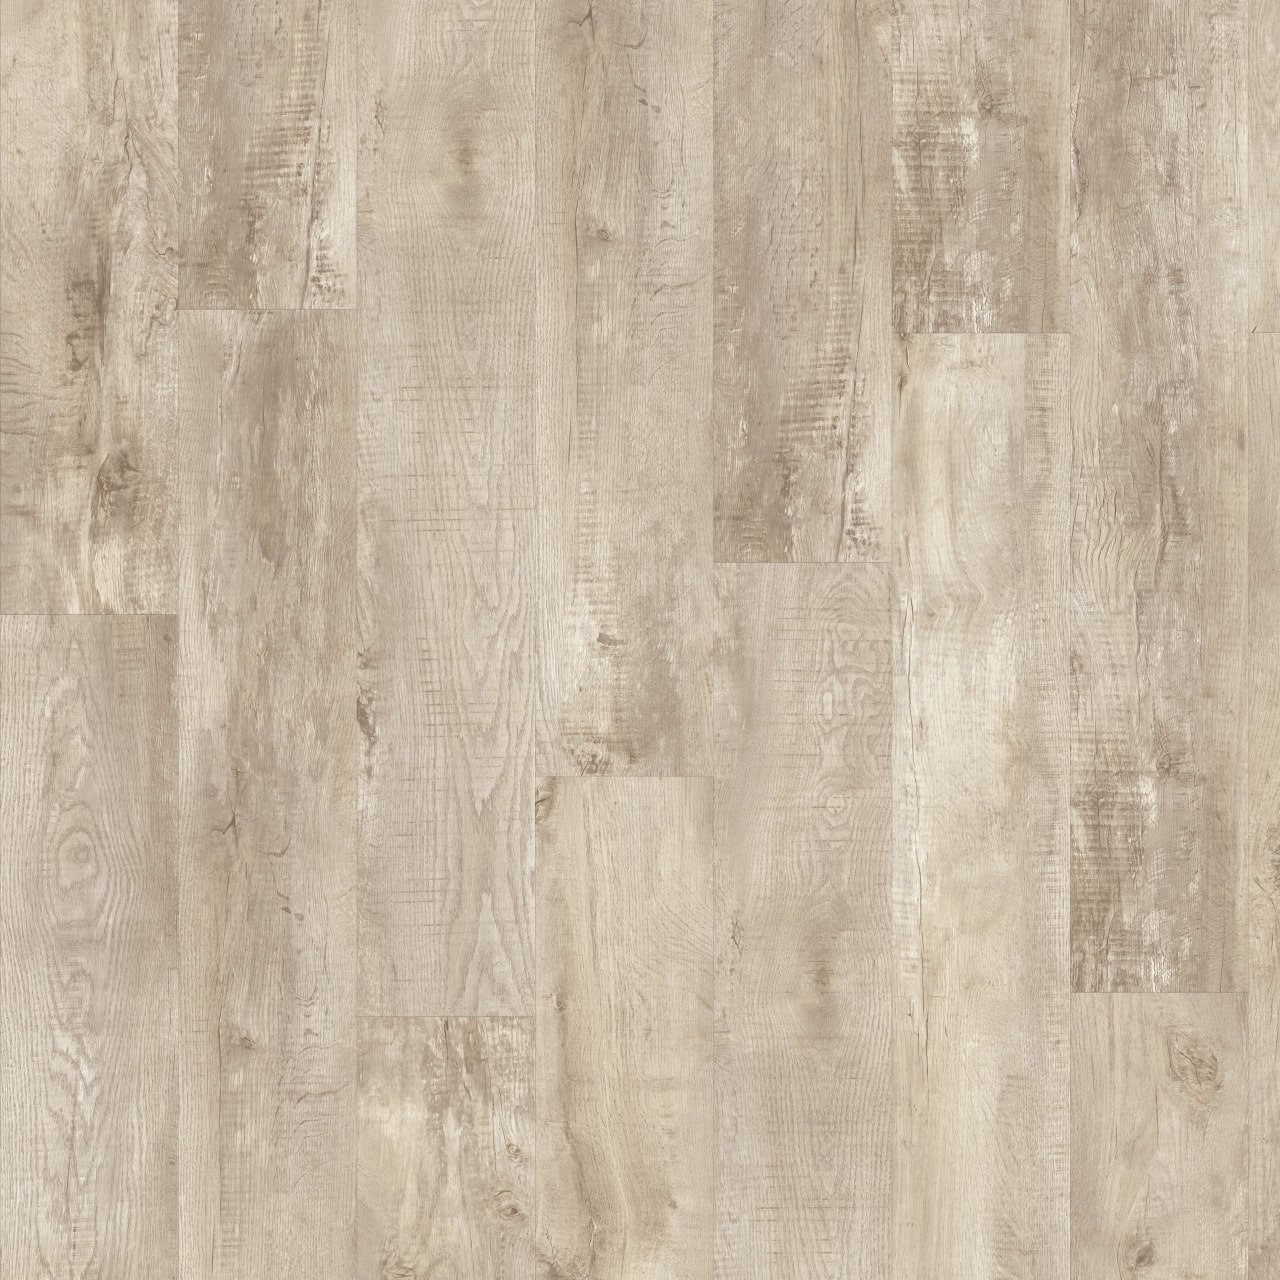 LayRed Country Oak 54285